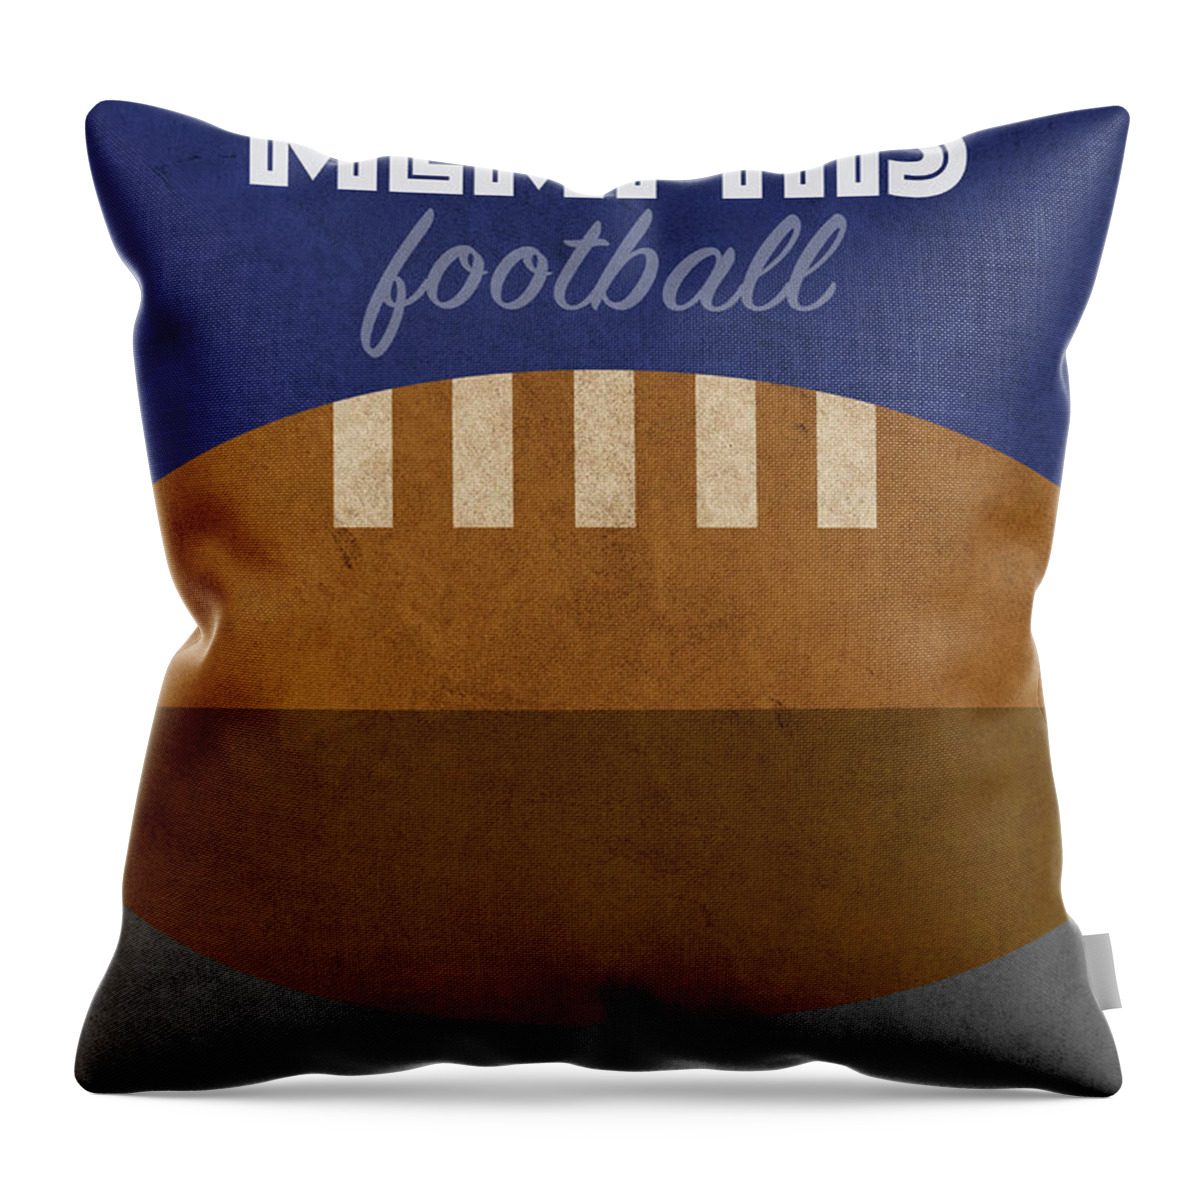 Memphis Throw Pillow featuring the mixed media Memphis Football College Sports Retro Vintage Poster by Design Turnpike